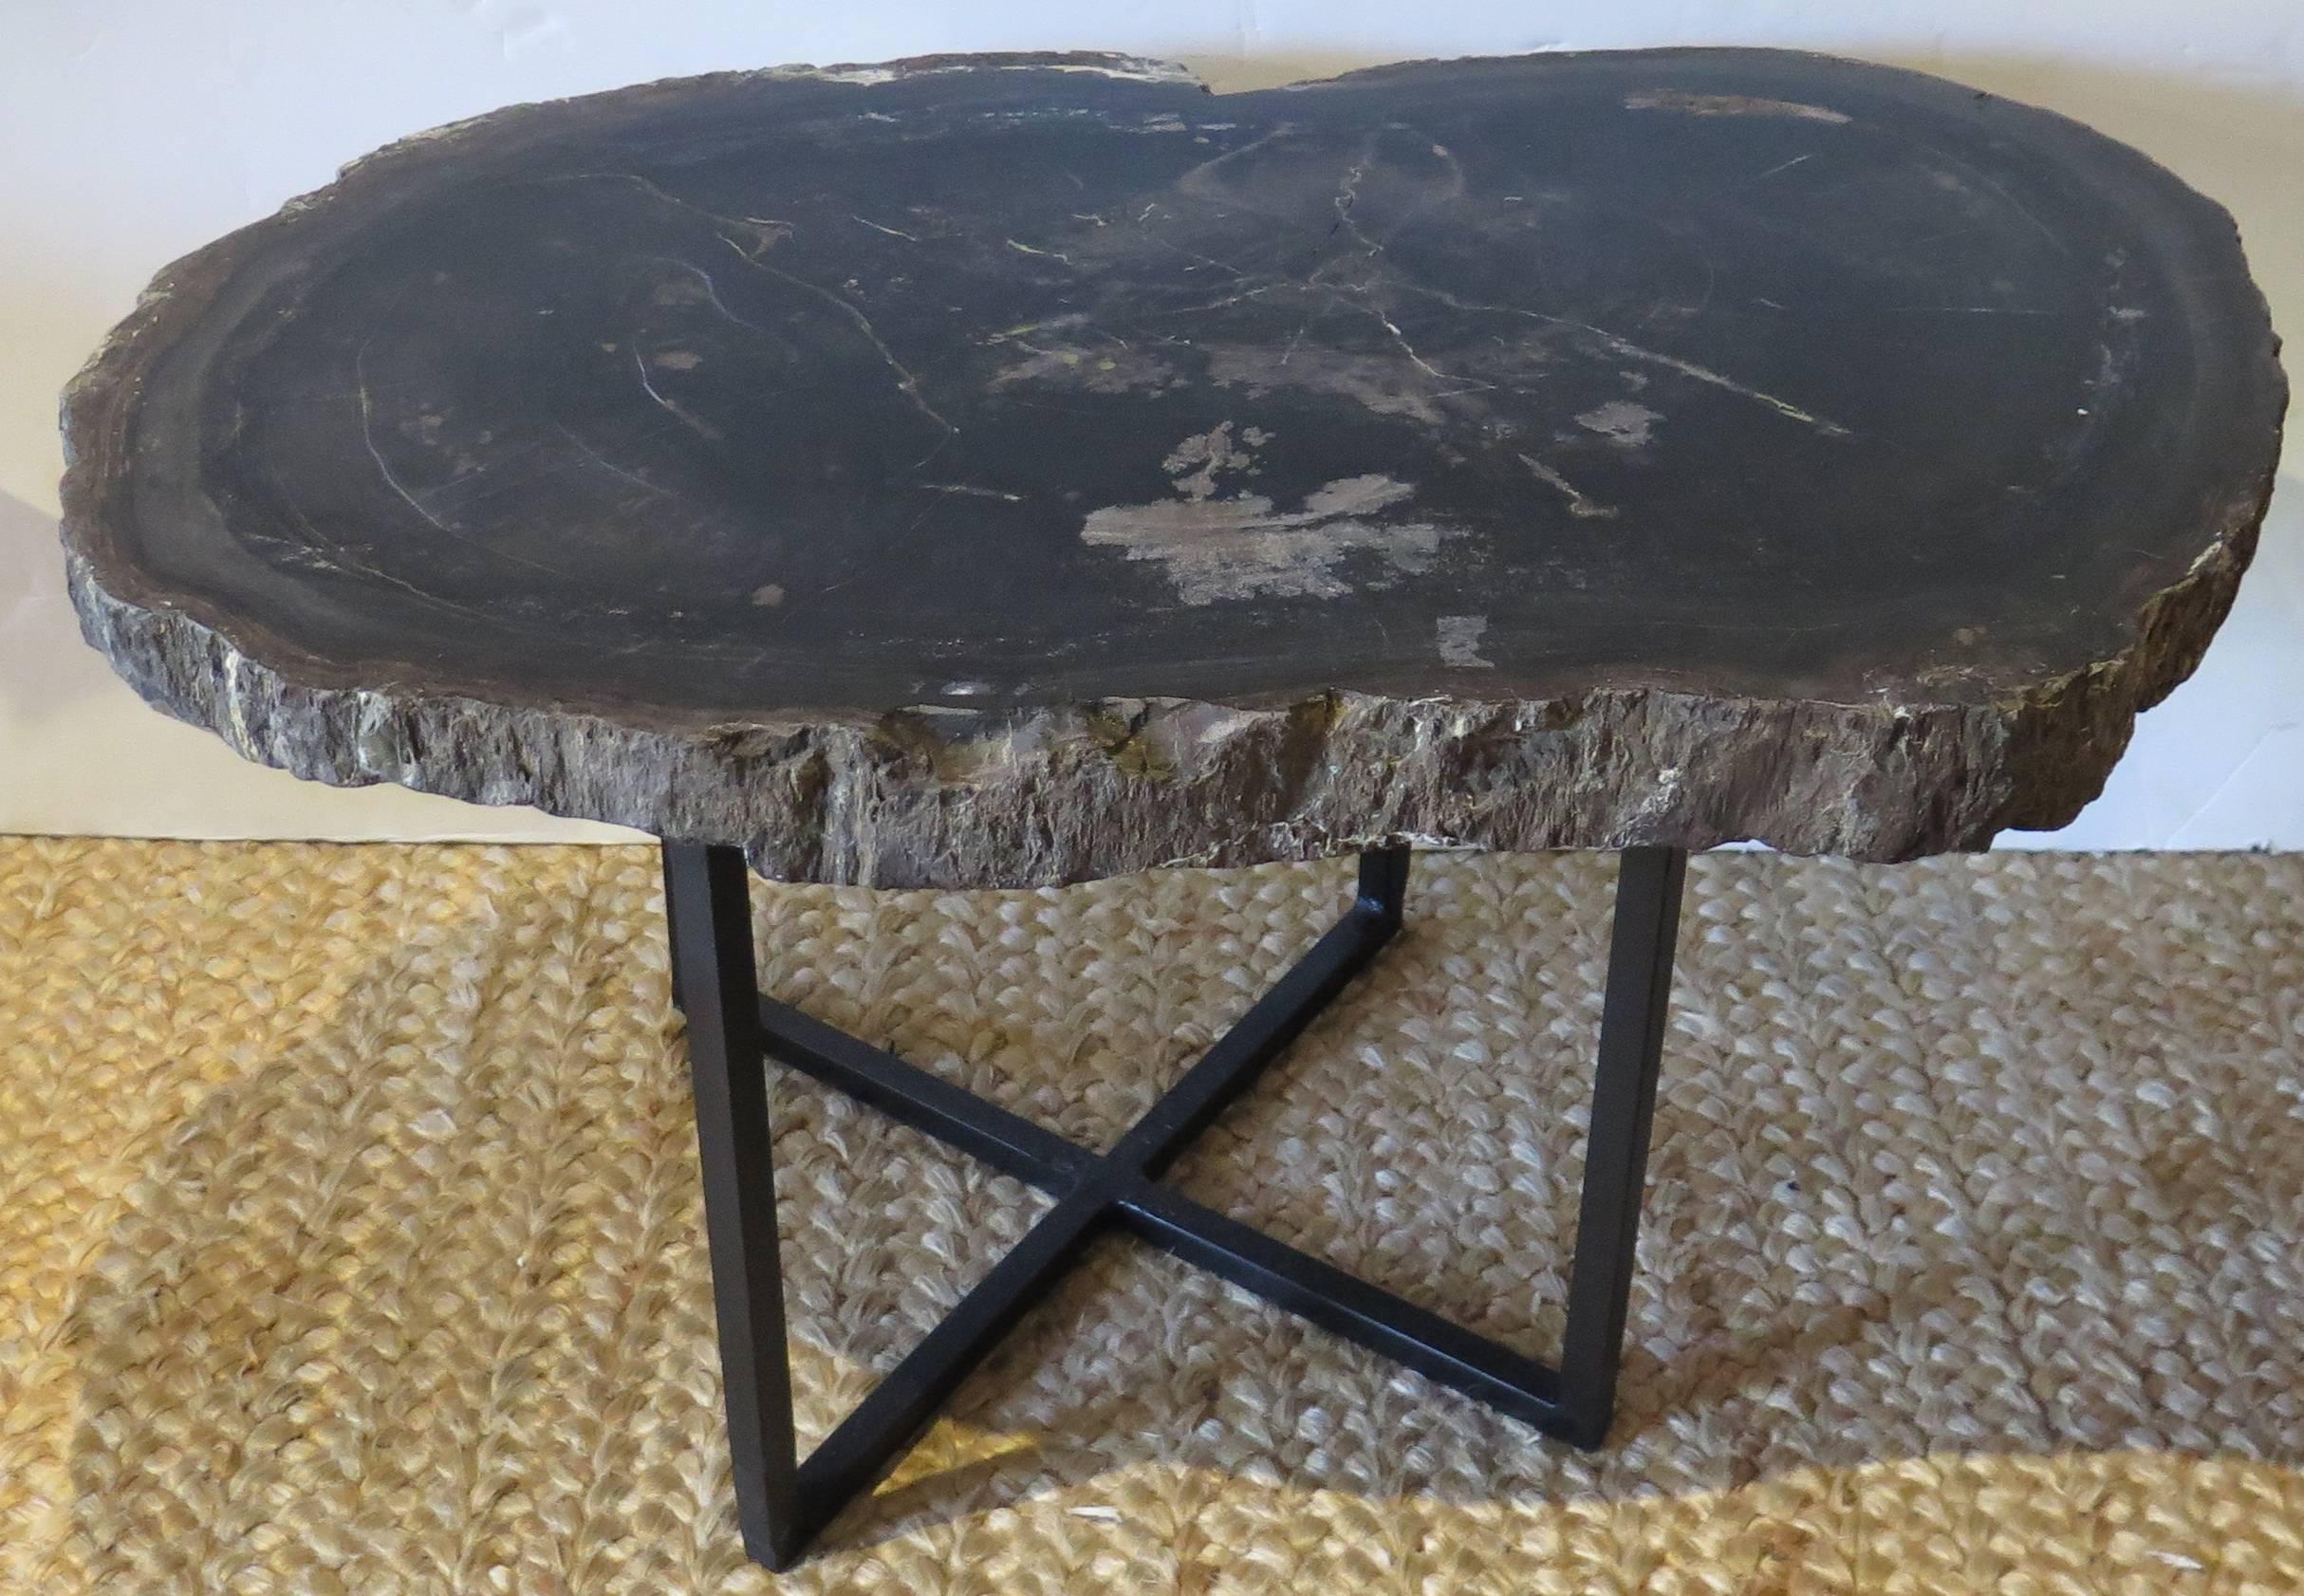 Beautiful slab of petrified wood with custom steel base. Perfect as a cocktail or coffee table.